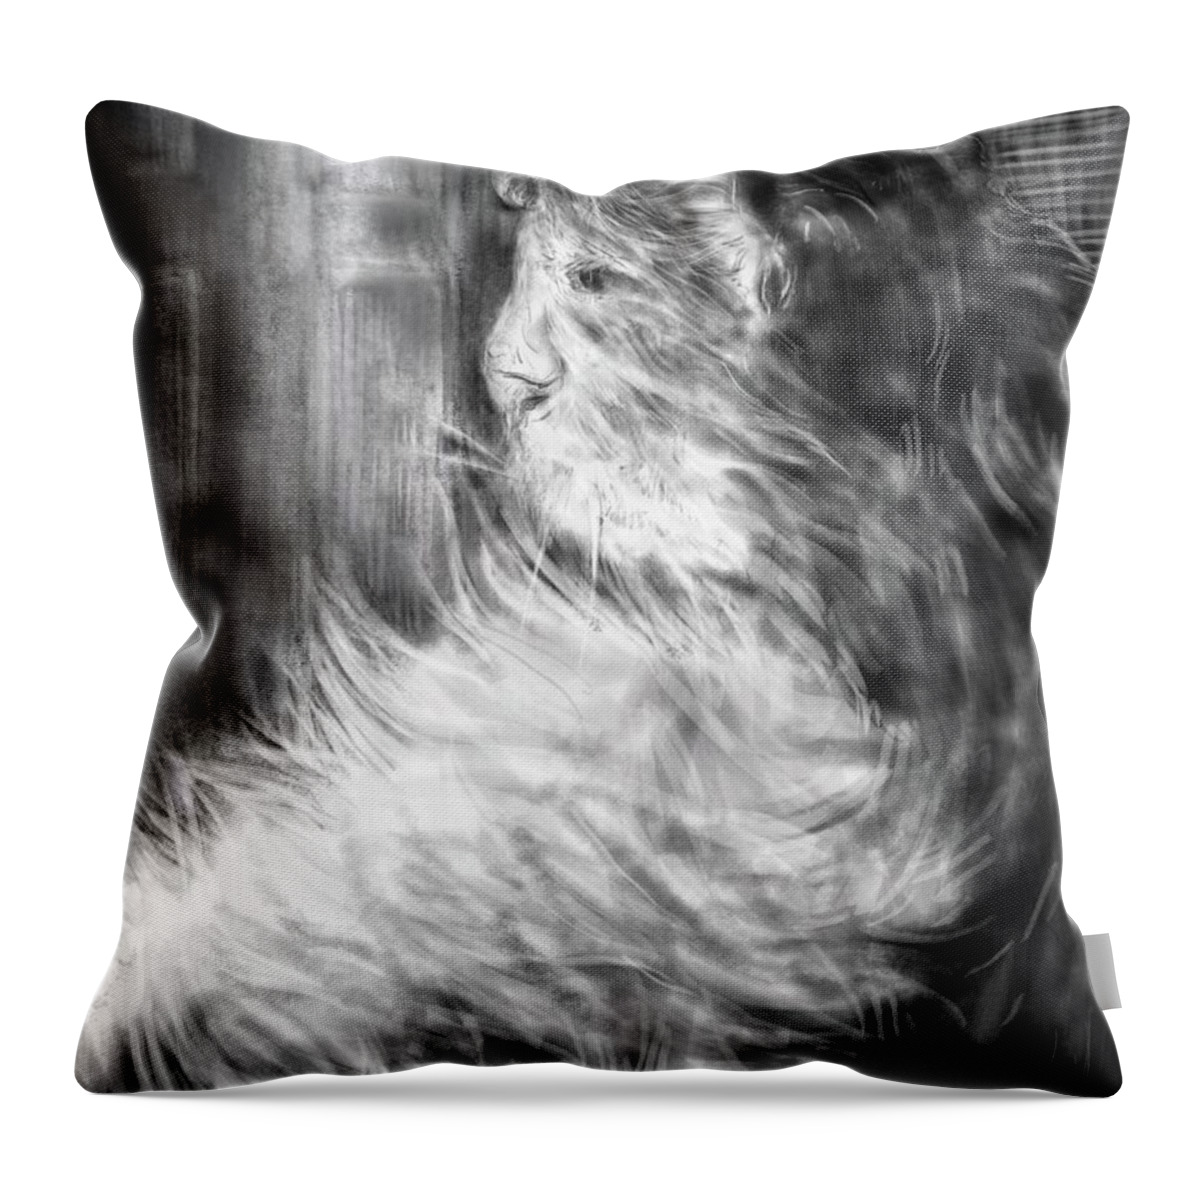 Cat Throw Pillow featuring the digital art Quiescence by Angela Weddle